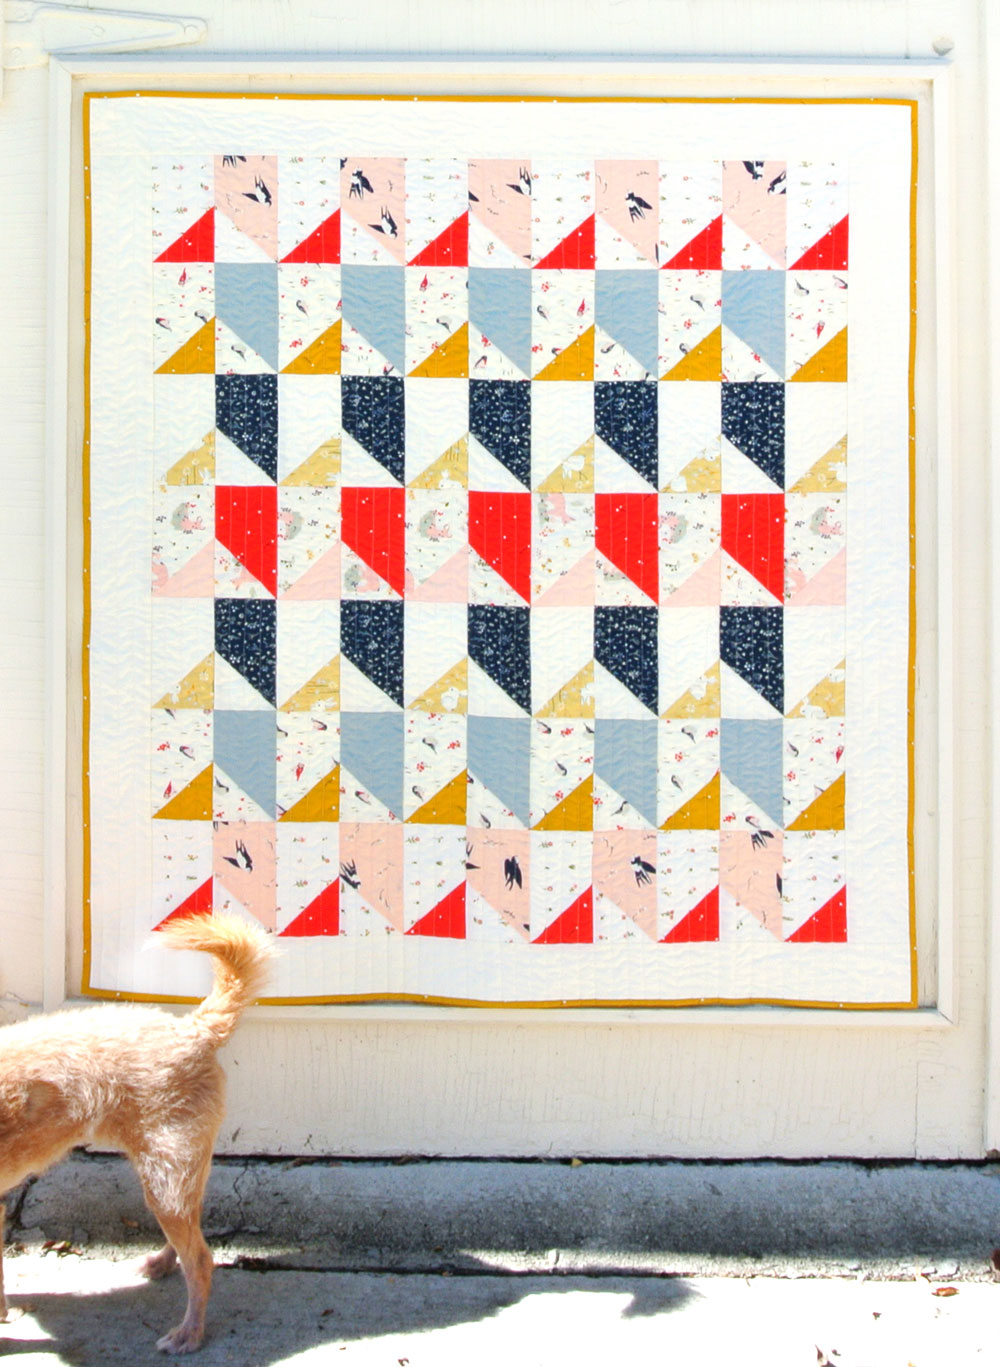 Free Little Houses Baby Quilt Pattern | Suzy Quilts https://suzyquilts.com/free-little-houses-baby-quilt-pattern